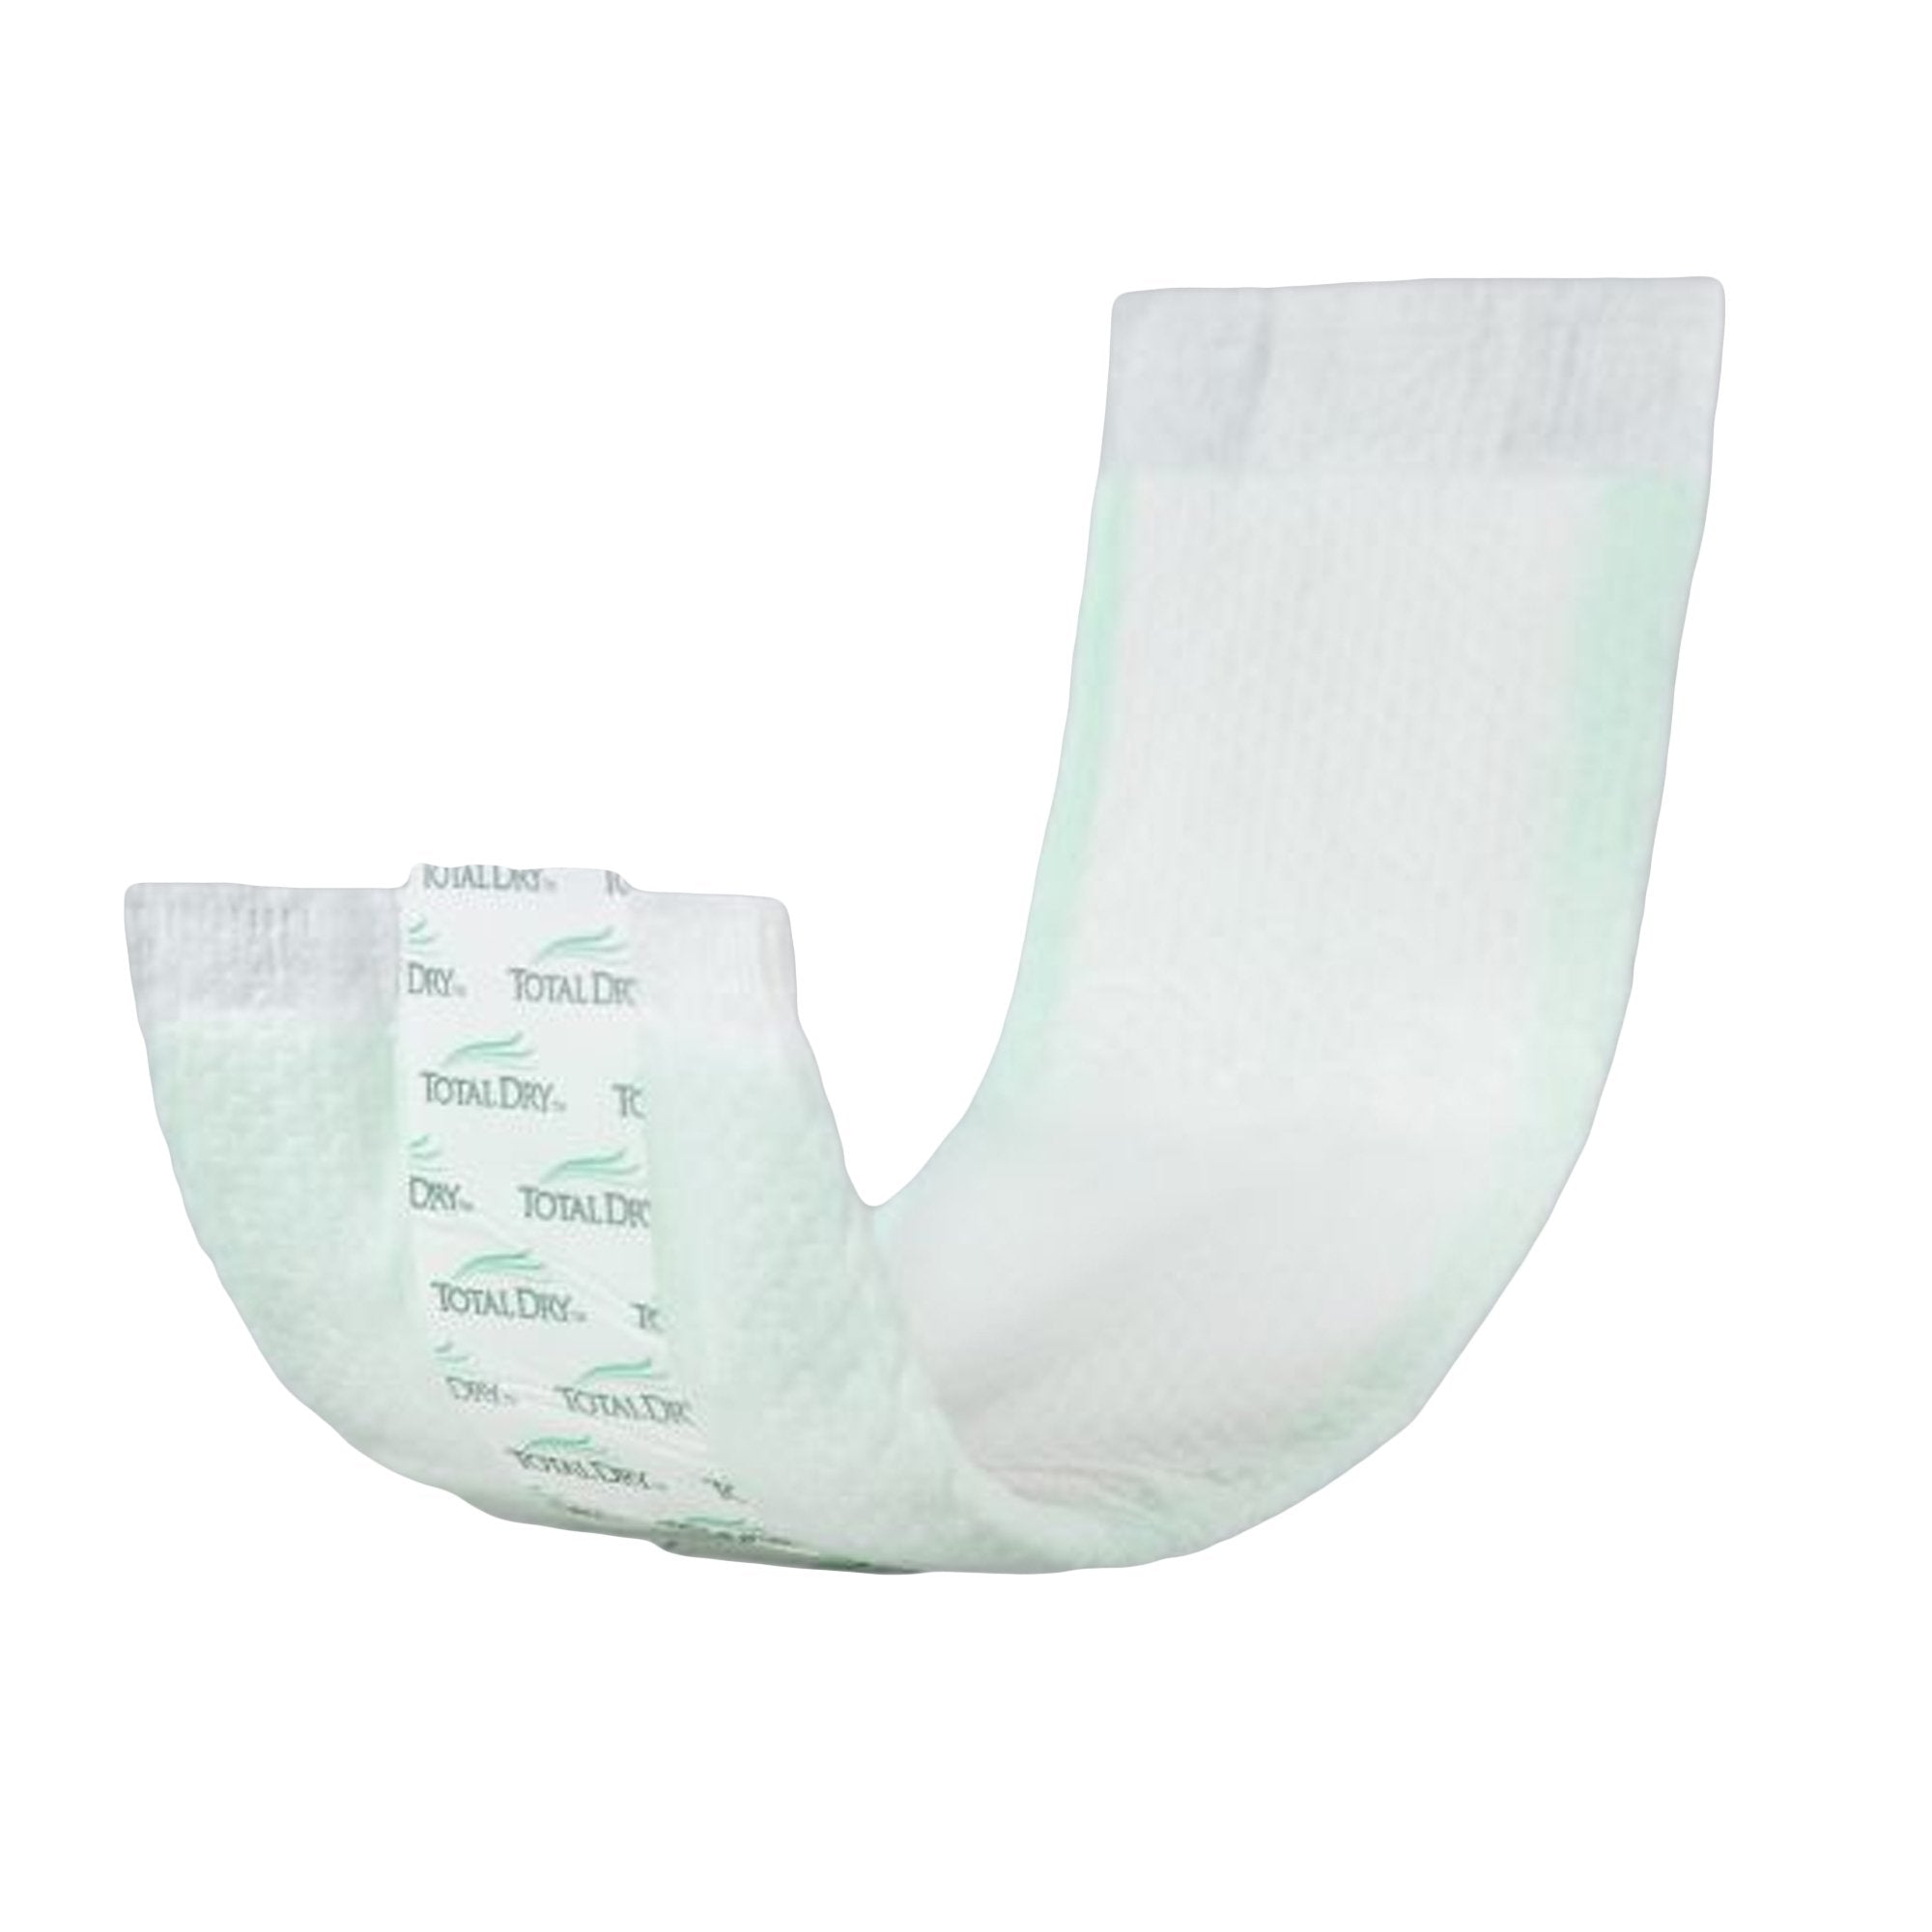 Bladder Control Pad TotalDry™ 12 Inch Length Moderate Absorbency SecureLoc Core One Size Fits Most